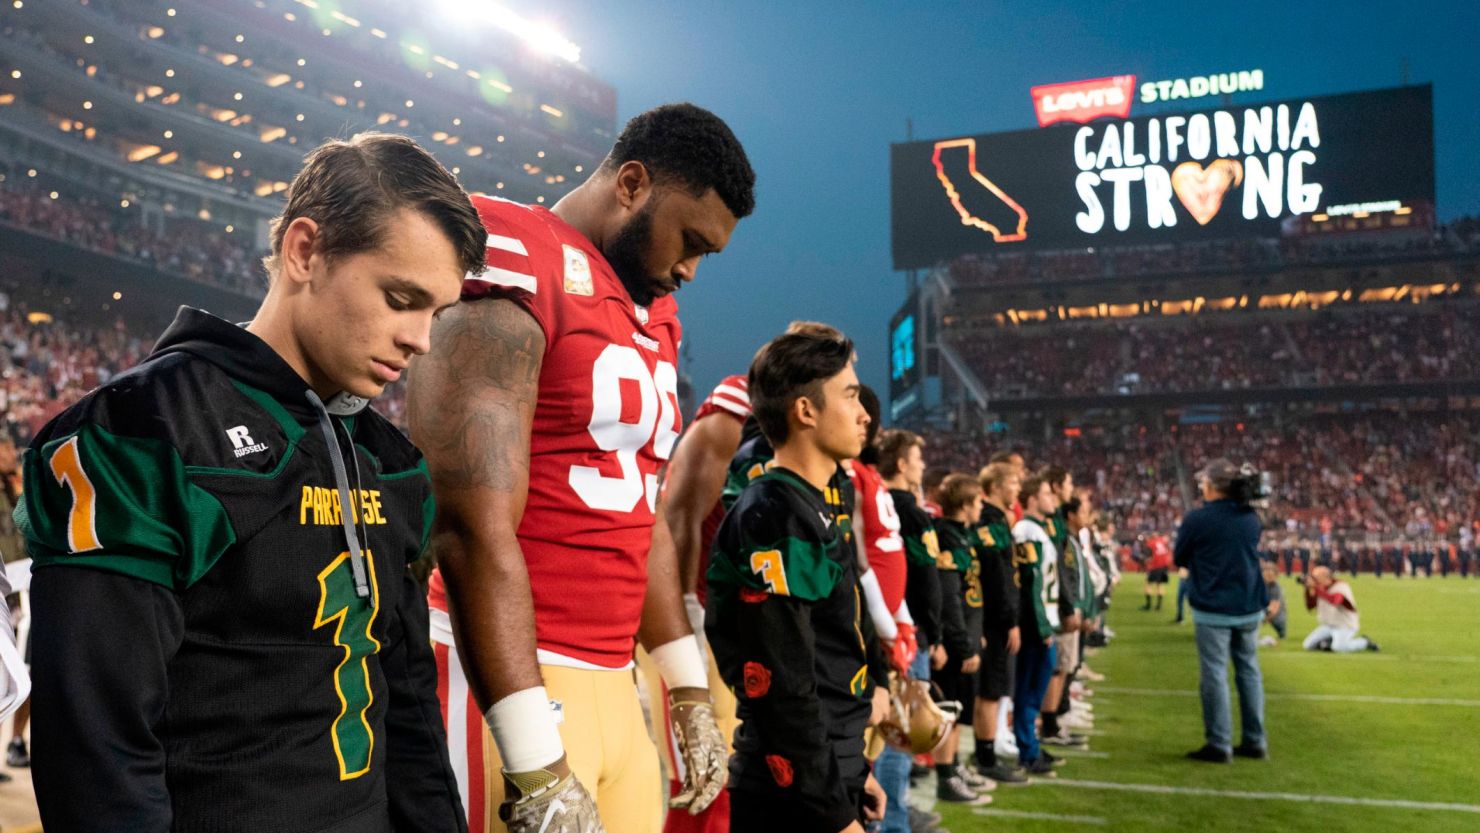 San Francisco 49ers defensive tackle DeForest Buckner and Paradise High School football players observe a moment of silence before the game against the New York Giants.